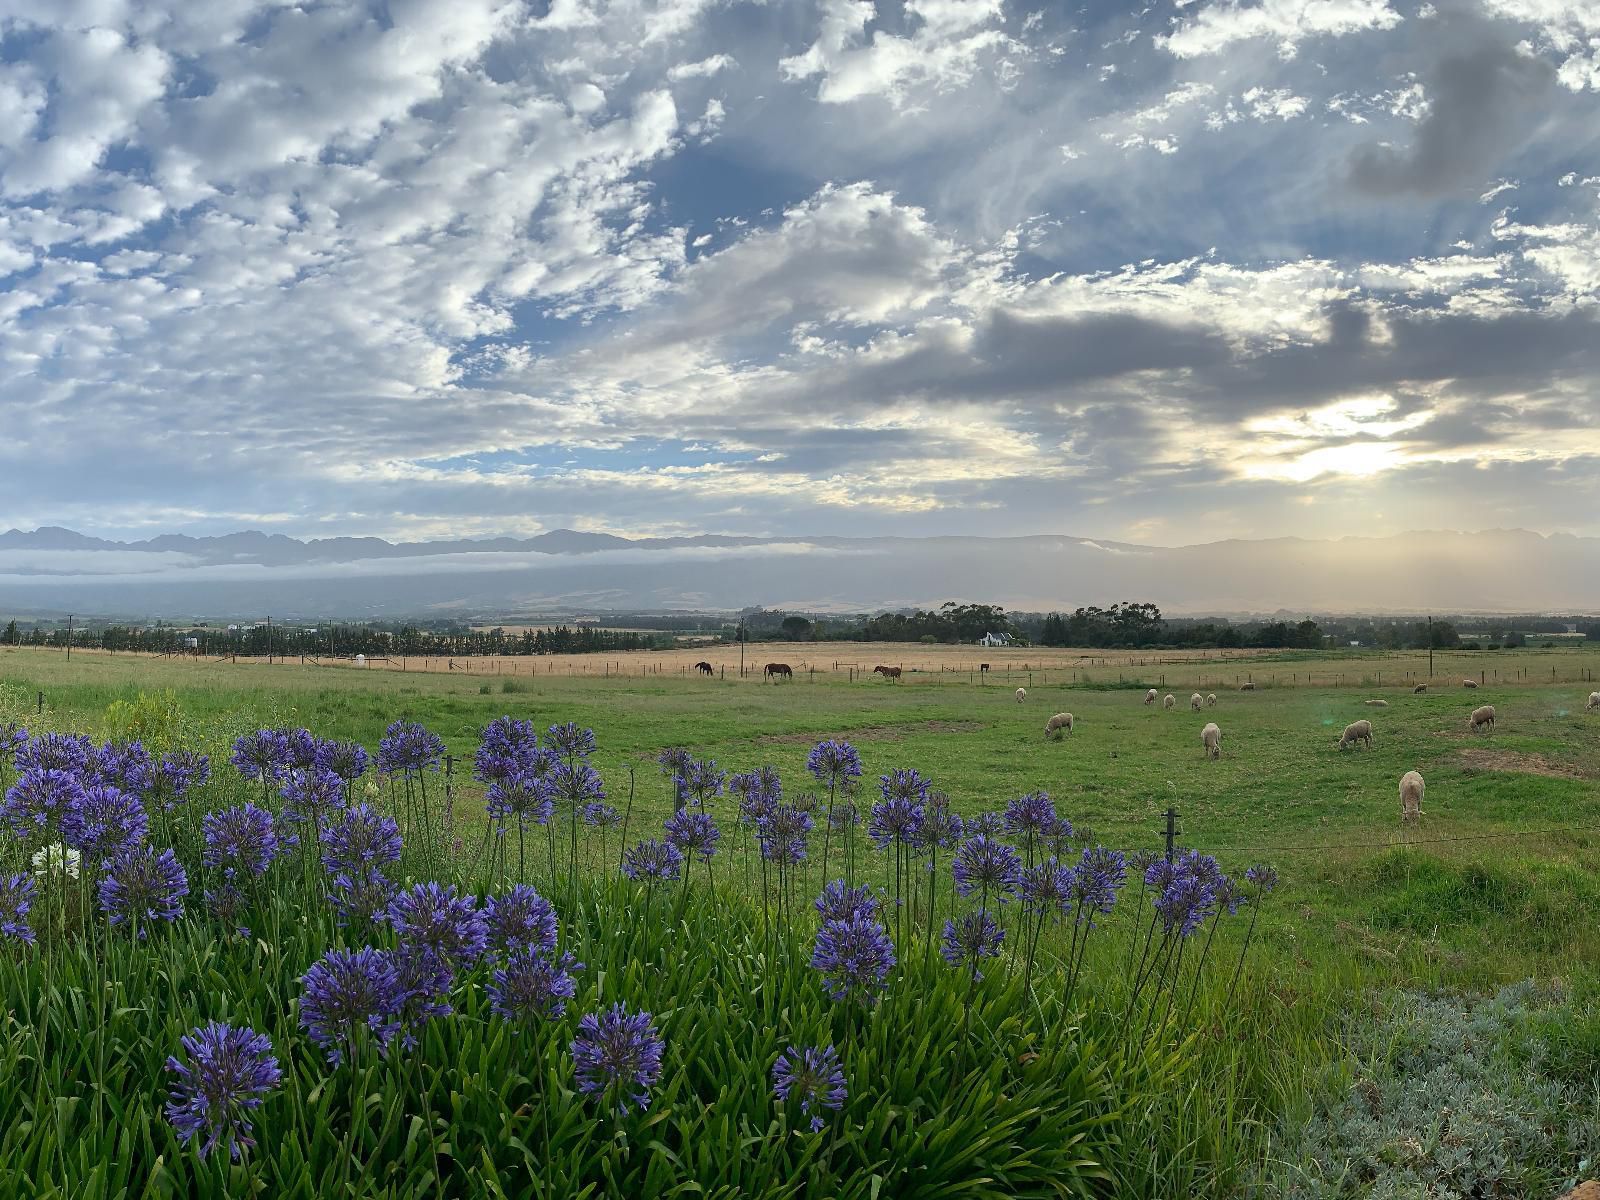 Raptor Rise Tulbagh Western Cape South Africa Field, Nature, Agriculture, Lavender, Plant, Lowland